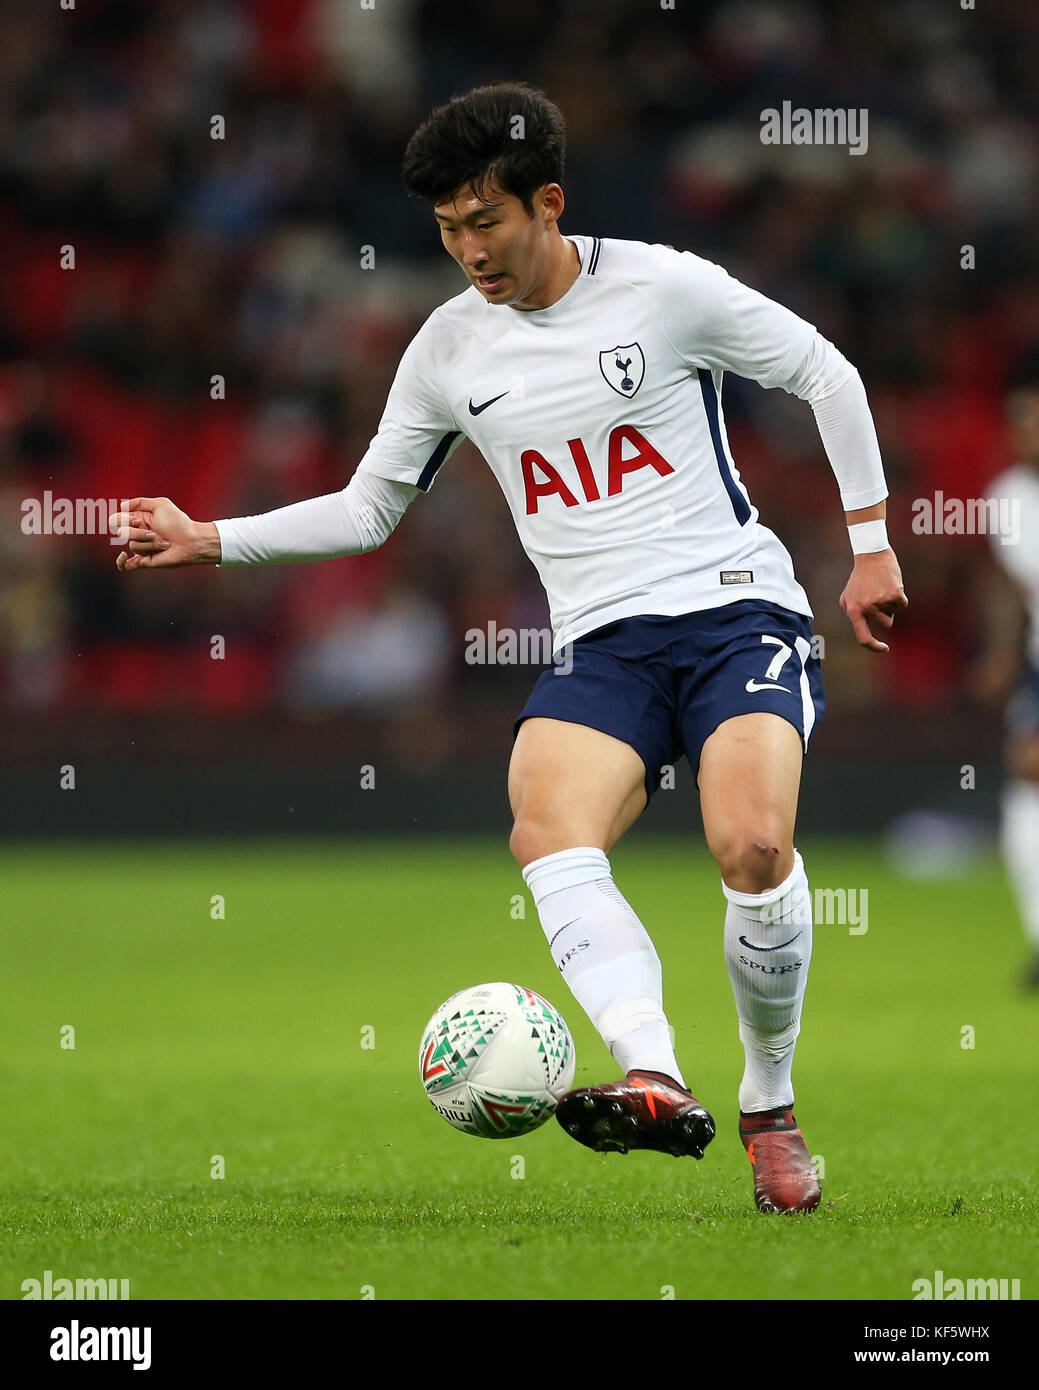 Tottenham Hotspur's Son Heung-Min during the Carabao Cup, Fourth Round match at Wembley, London. PRESS ASSOCIATION Photo. Picture date: Wednesday October 25, 2017. See PA story SOCCER Tottenham. Photo credit should read: Steven Paston/PA Wire. RESTRICTIONS: No use with unauthorised audio, video, data, fixture lists, club/league logos or 'live' services. Online in-match use limited to 75 images, no video emulation. No use in betting, games or single club/league/player publications. Stock Photo